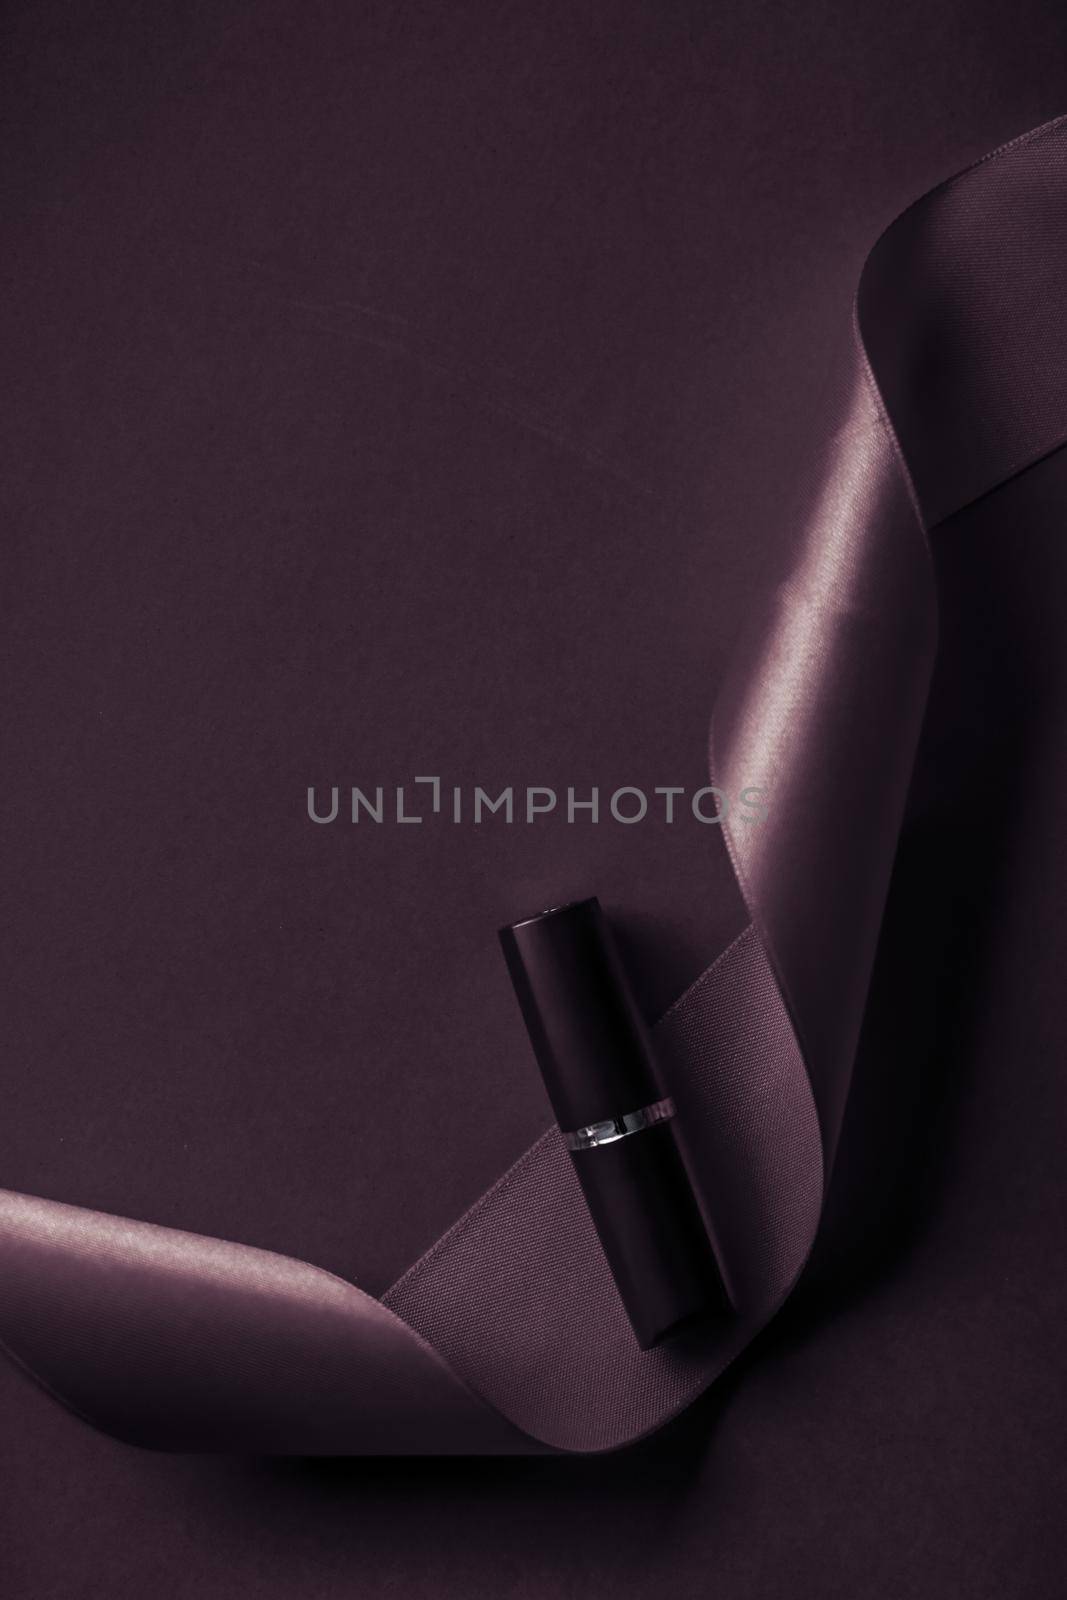 Cosmetic branding, glamour lip gloss and shopping sale concept - Luxury lipstick and silk ribbon on dark purple holiday background, make-up and cosmetics flatlay for beauty brand product design